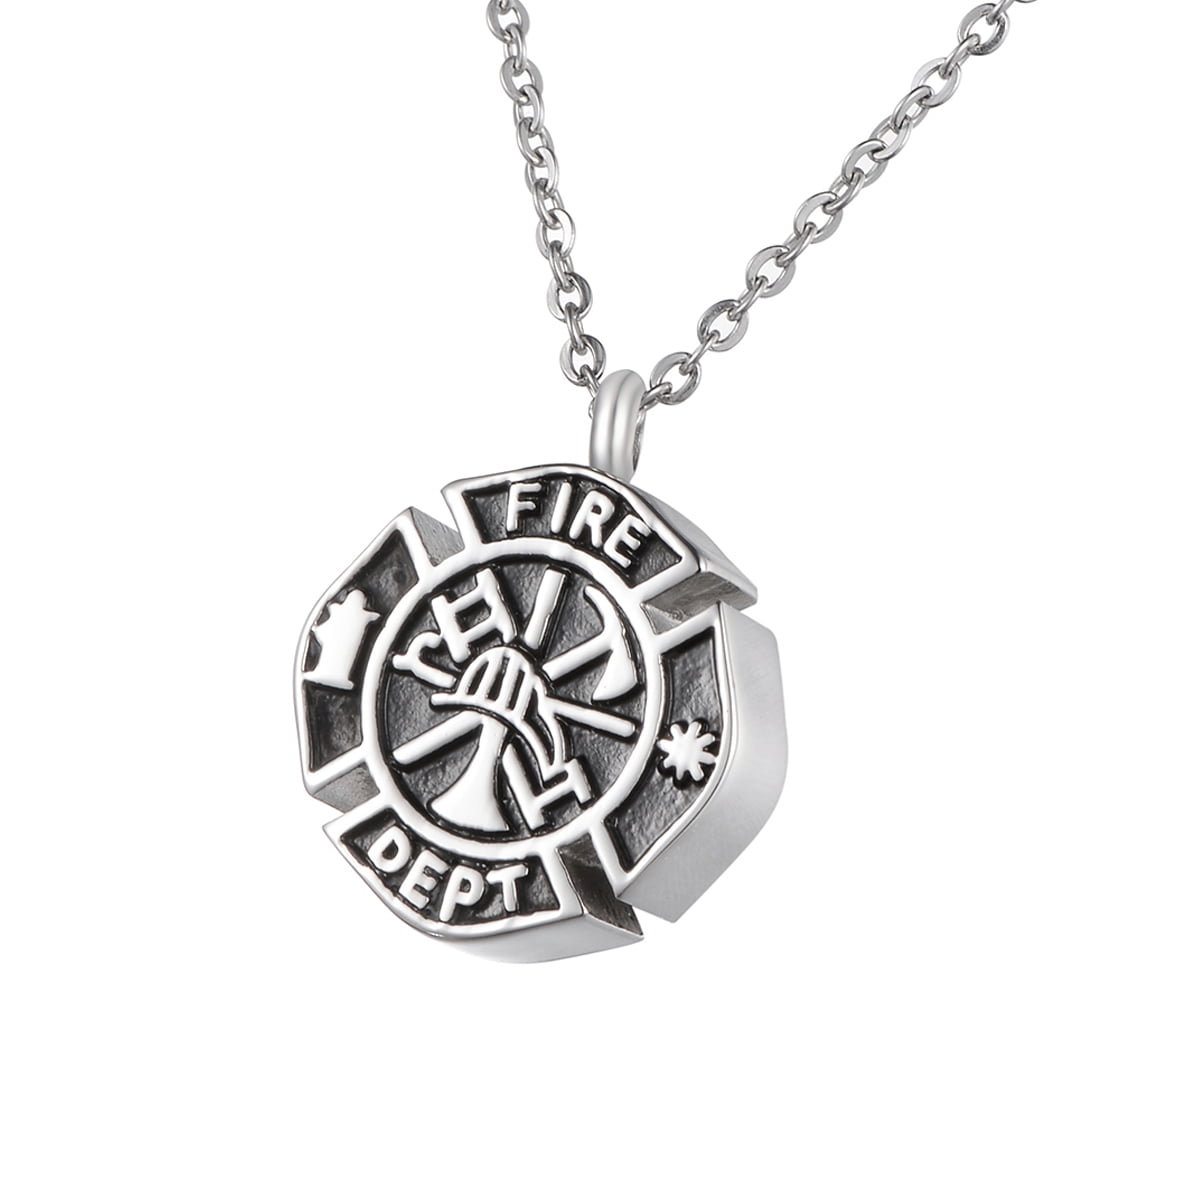 Firefighter Fire Dept Heavy Metal Pendant Charm Necklace also US Stock 